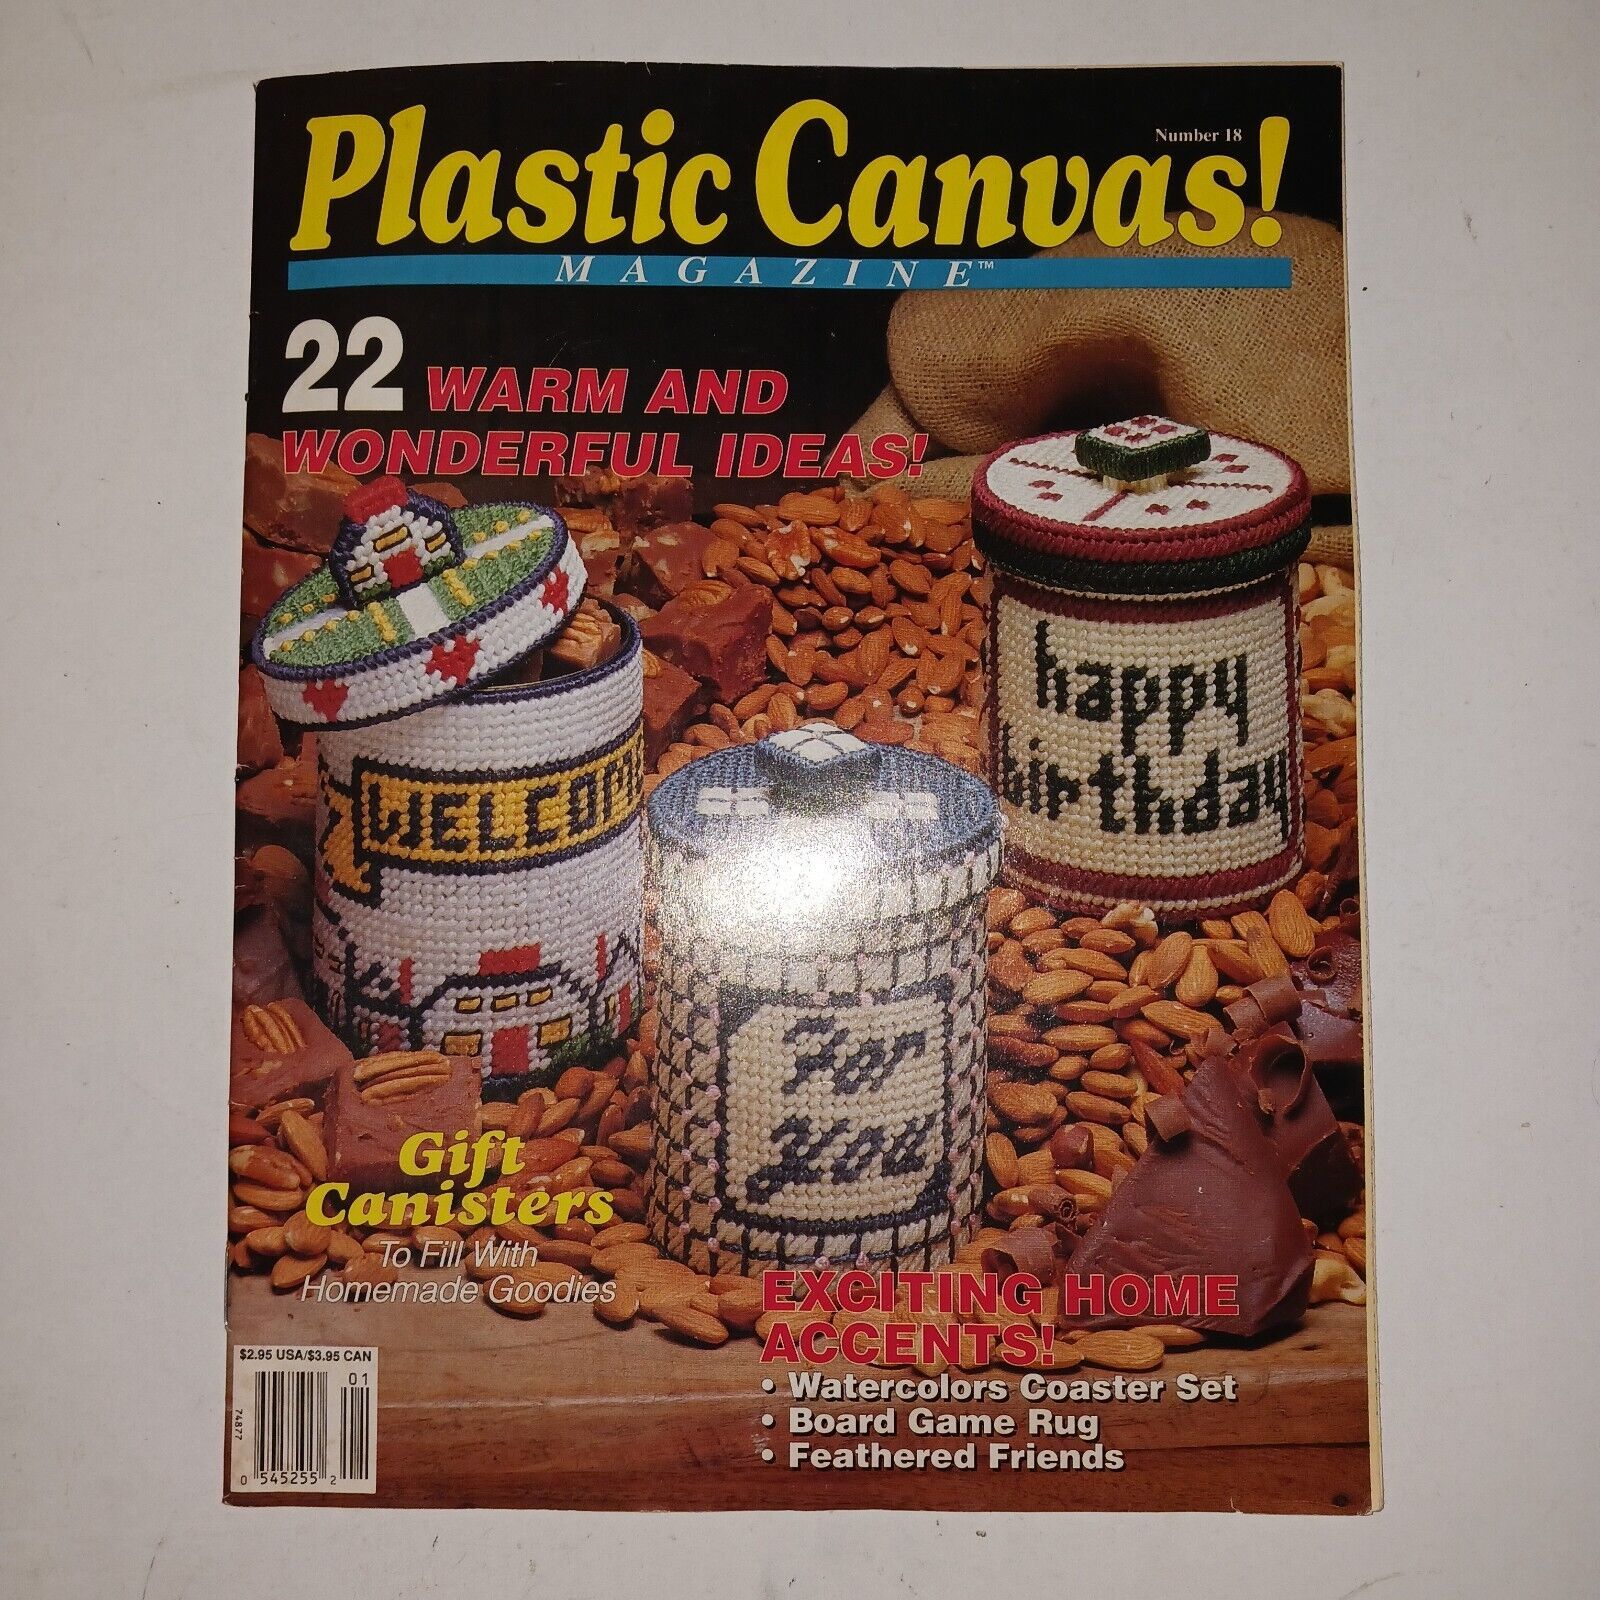 Needlecraft 22 Designs Gift Canisters More Plastic Canvas Magazine Number 18 - $9.50